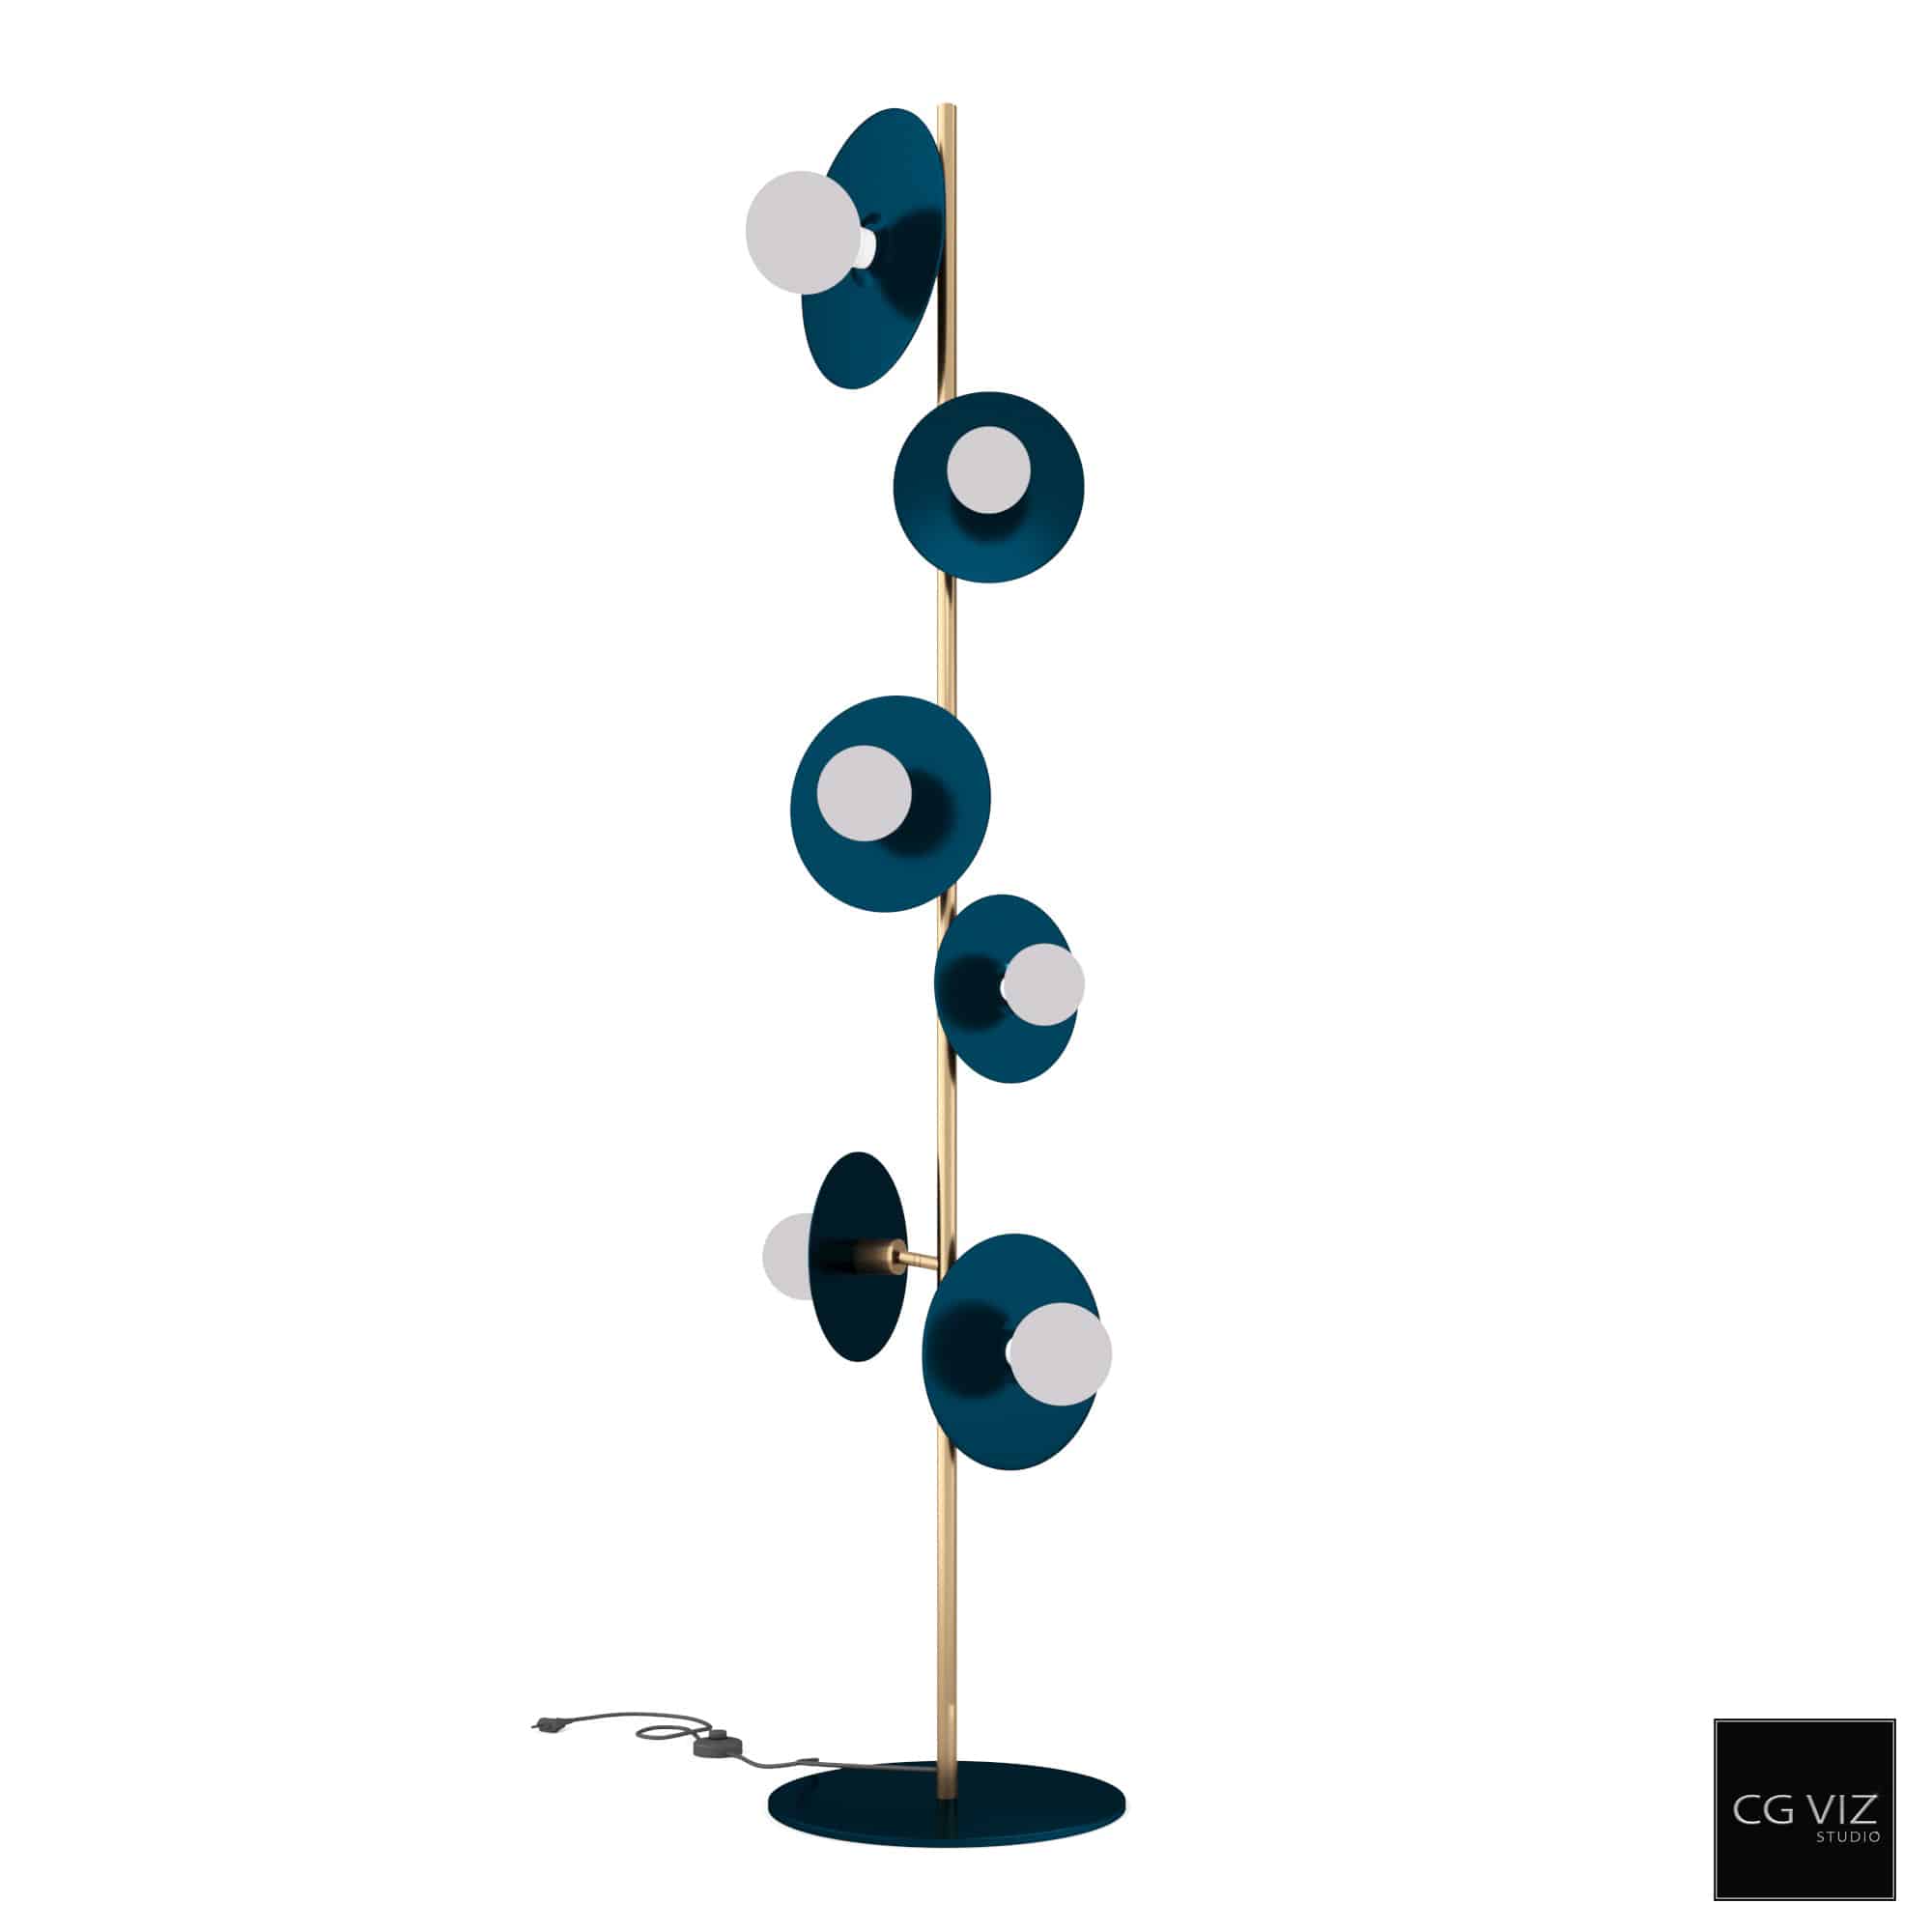 Rendered Preview of Archiproduct Vesoi Floor Lamp 3D Model